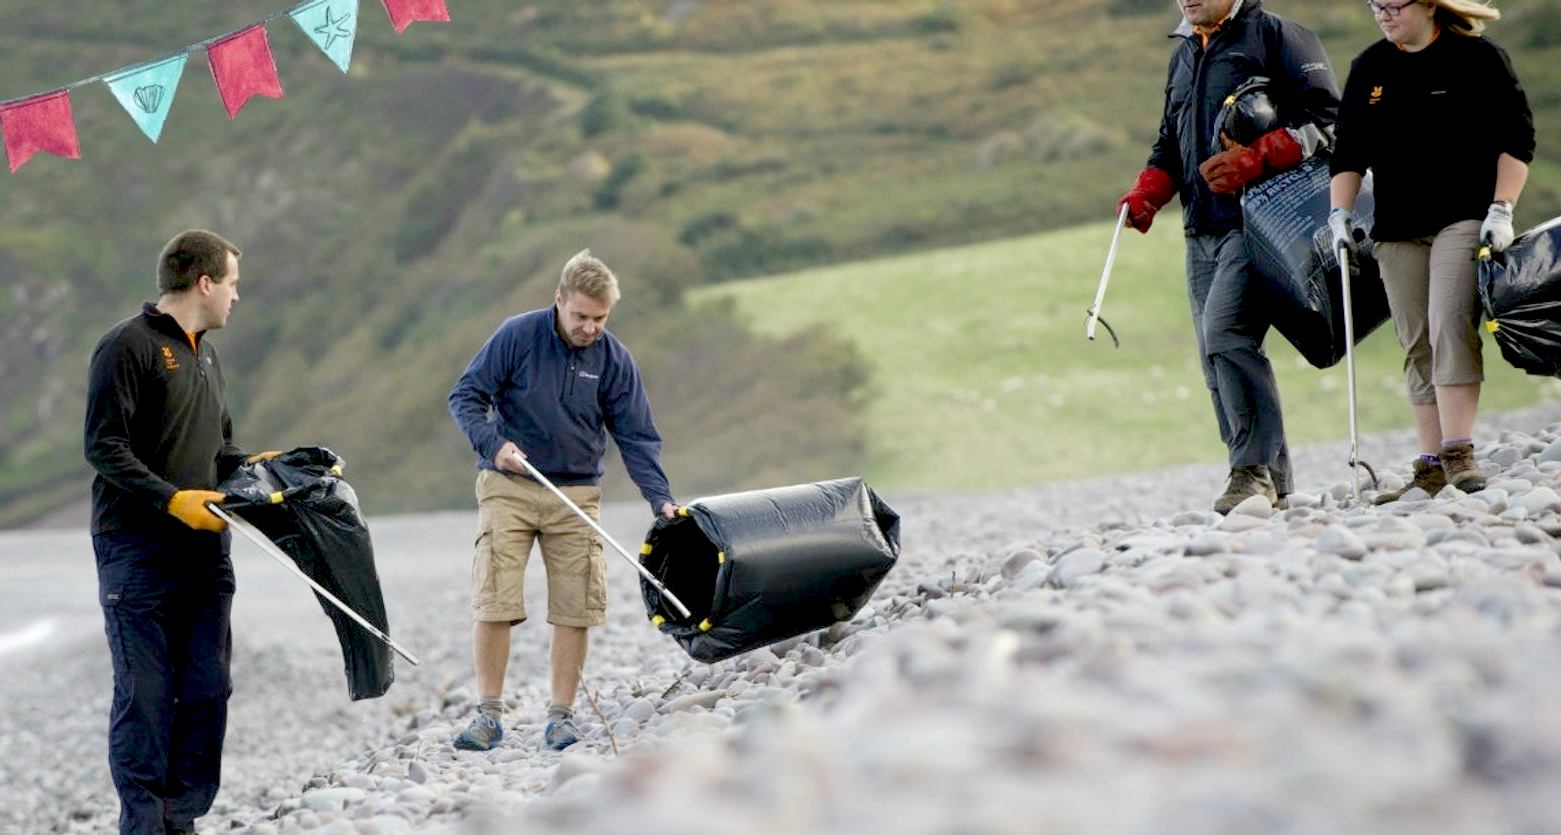 Beach cleaning using black plastic bags for collection